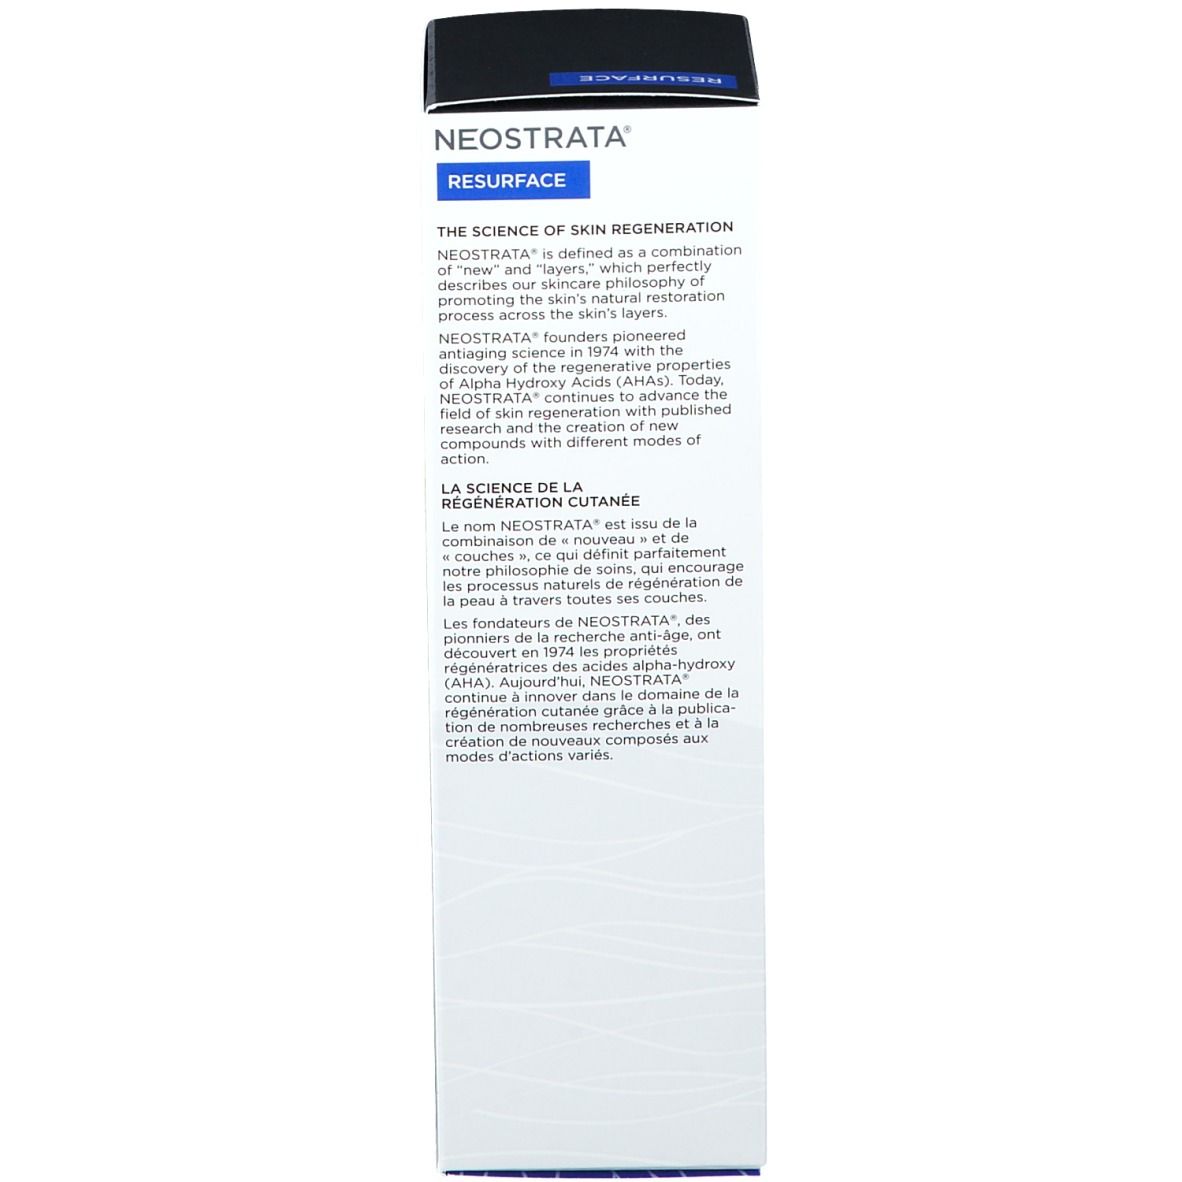 NeoStrata Ultra Smoothing Lotion 200ML – Enhanze Online